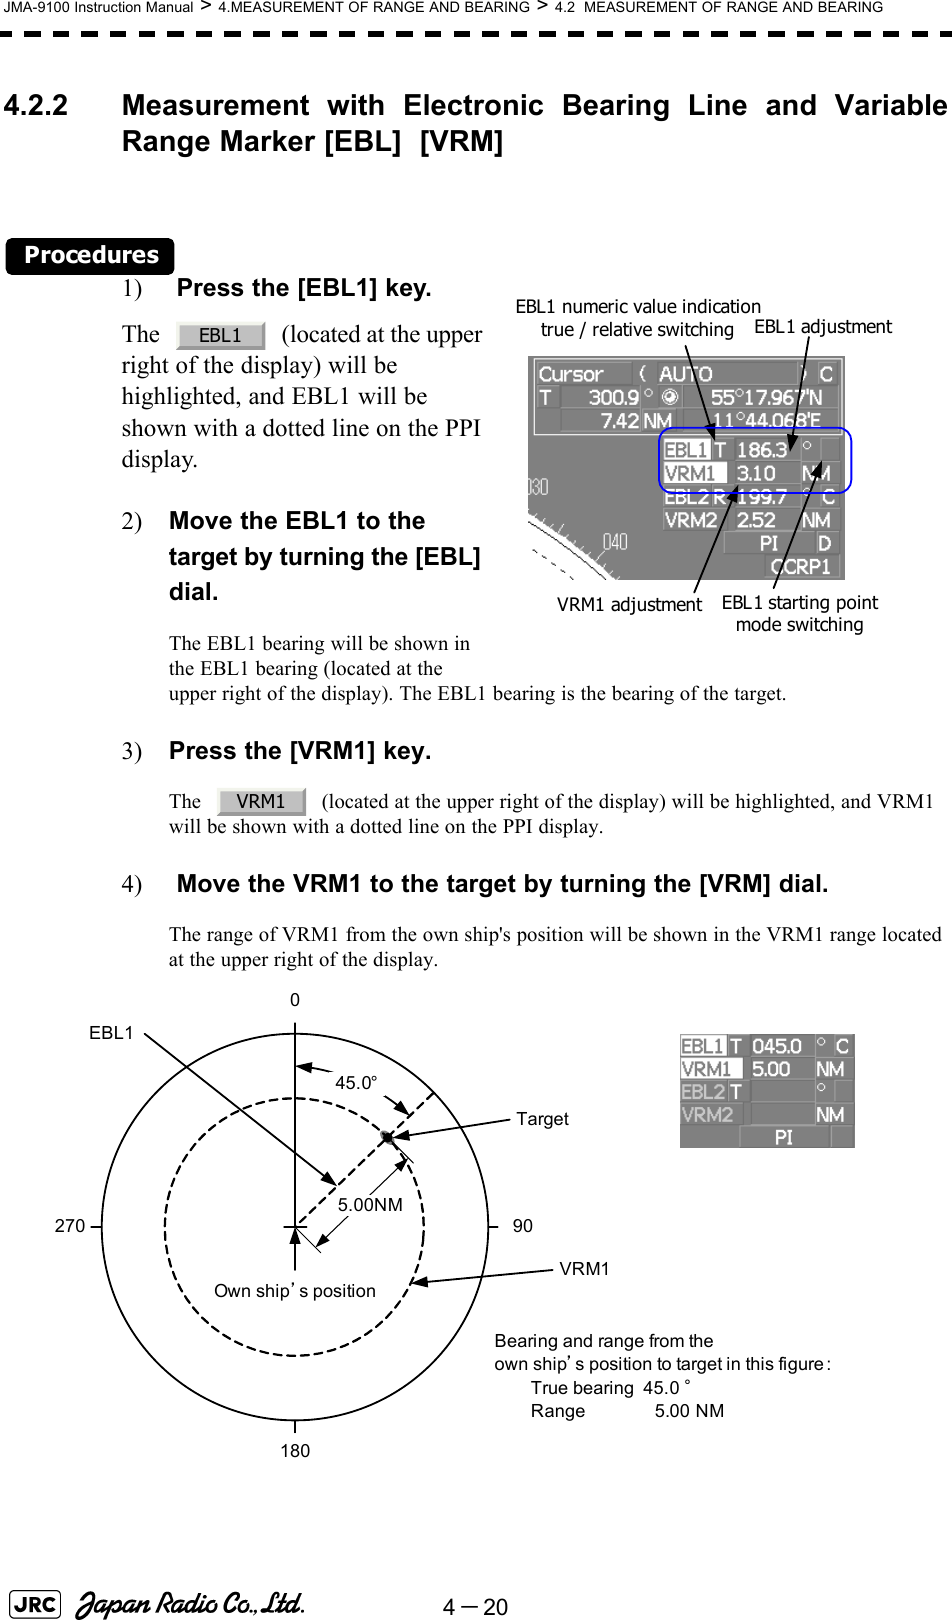 4－20JMA-9100 Instruction Manual &gt; 4.MEASUREMENT OF RANGE AND BEARING &gt; 4.2  MEASUREMENT OF RANGE AND BEARING4.2.2 Measurement with Electronic Bearing Line and VariableRange Marker [EBL]  [VRM] Procedures1)  Press the [EBL1] key.The     (located at the upper right of the display) will be highlighted, and EBL1 will be shown with a dotted line on the PPI display.2) Move the EBL1 to the target by turning the [EBL] dial.The EBL1 bearing will be shown in the EBL1 bearing (located at the upper right of the display). The EBL1 bearing is the bearing of the target.3) Press the [VRM1] key.The     (located at the upper right of the display) will be highlighted, and VRM1 will be shown with a dotted line on the PPI display.4)  Move the VRM1 to the target by turning the [VRM] dial.The range of VRM1 from the own ship&apos;s position will be shown in the VRM1 range located at the upper right of the display.EBL1 adjustmentVRM1 adjustmentEBL1 numeric value indication true / relative switchingEBL1 starting point mode switchingEBL1VRM1TargetEBL11800 90270VRM15.00NMBearing and range from theown ship’s position to target in this figure:True bearing  45.0 °Range 5.00 NM45.0°Own ship’s position